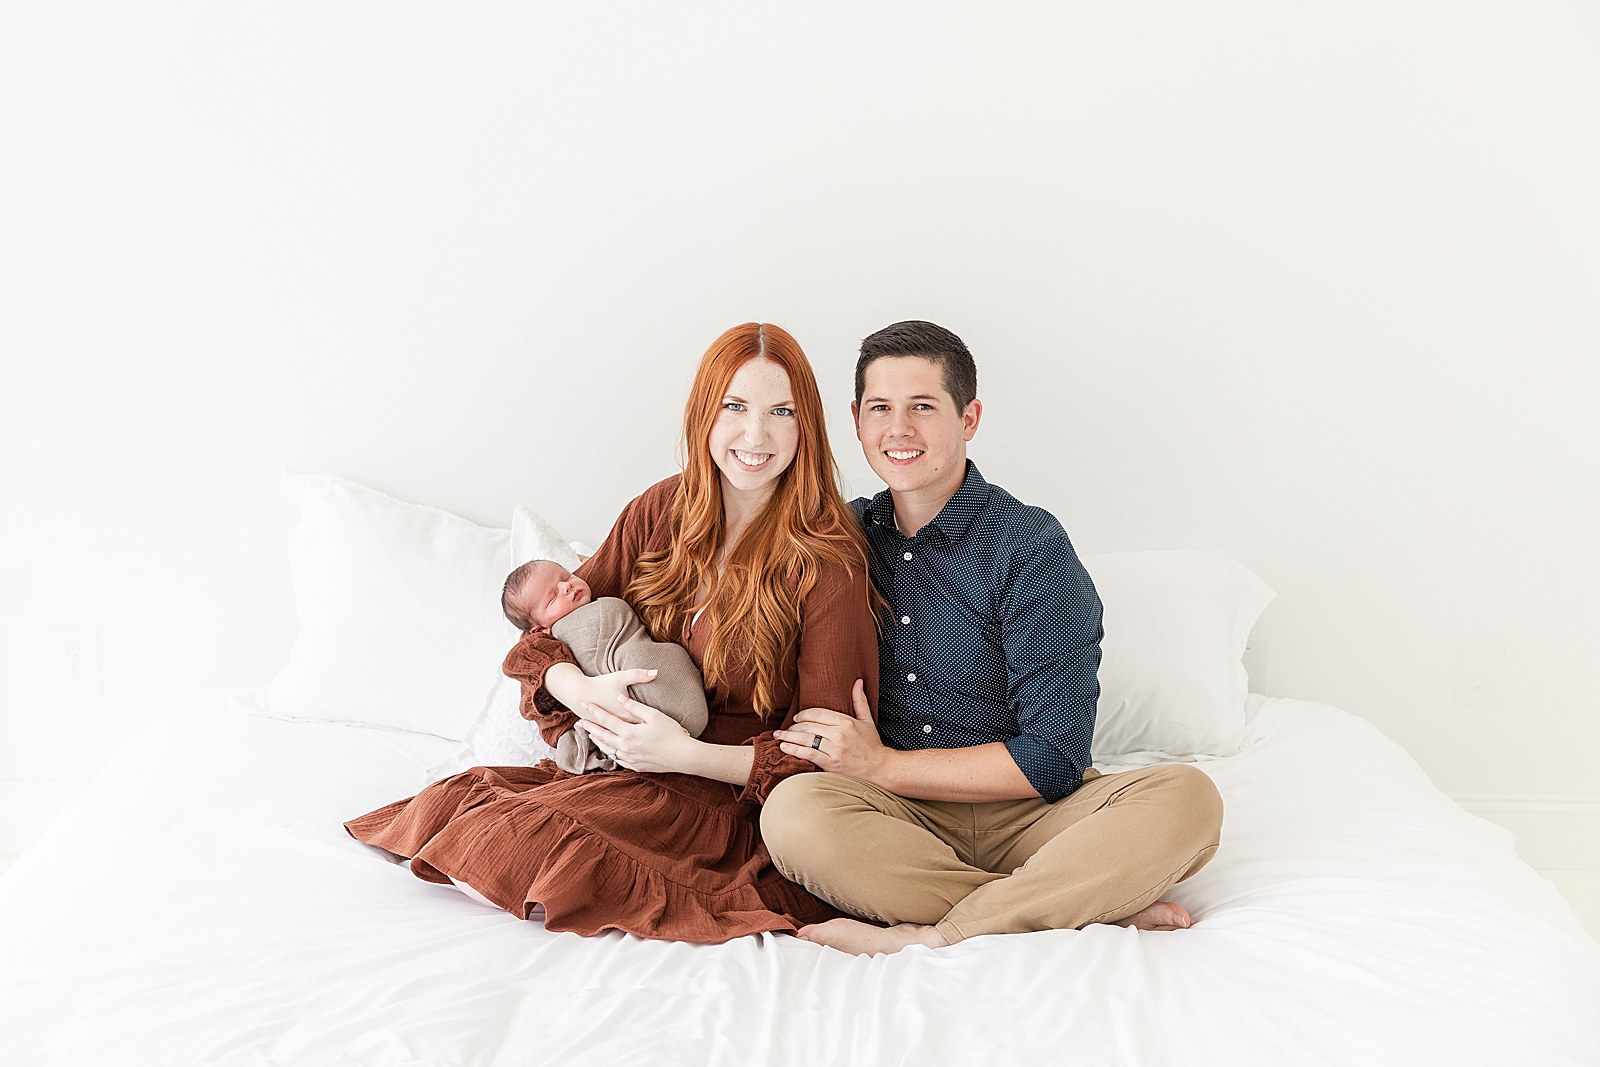 Newborn Photos Mom and dad sitting on bed holding baby at newborn session